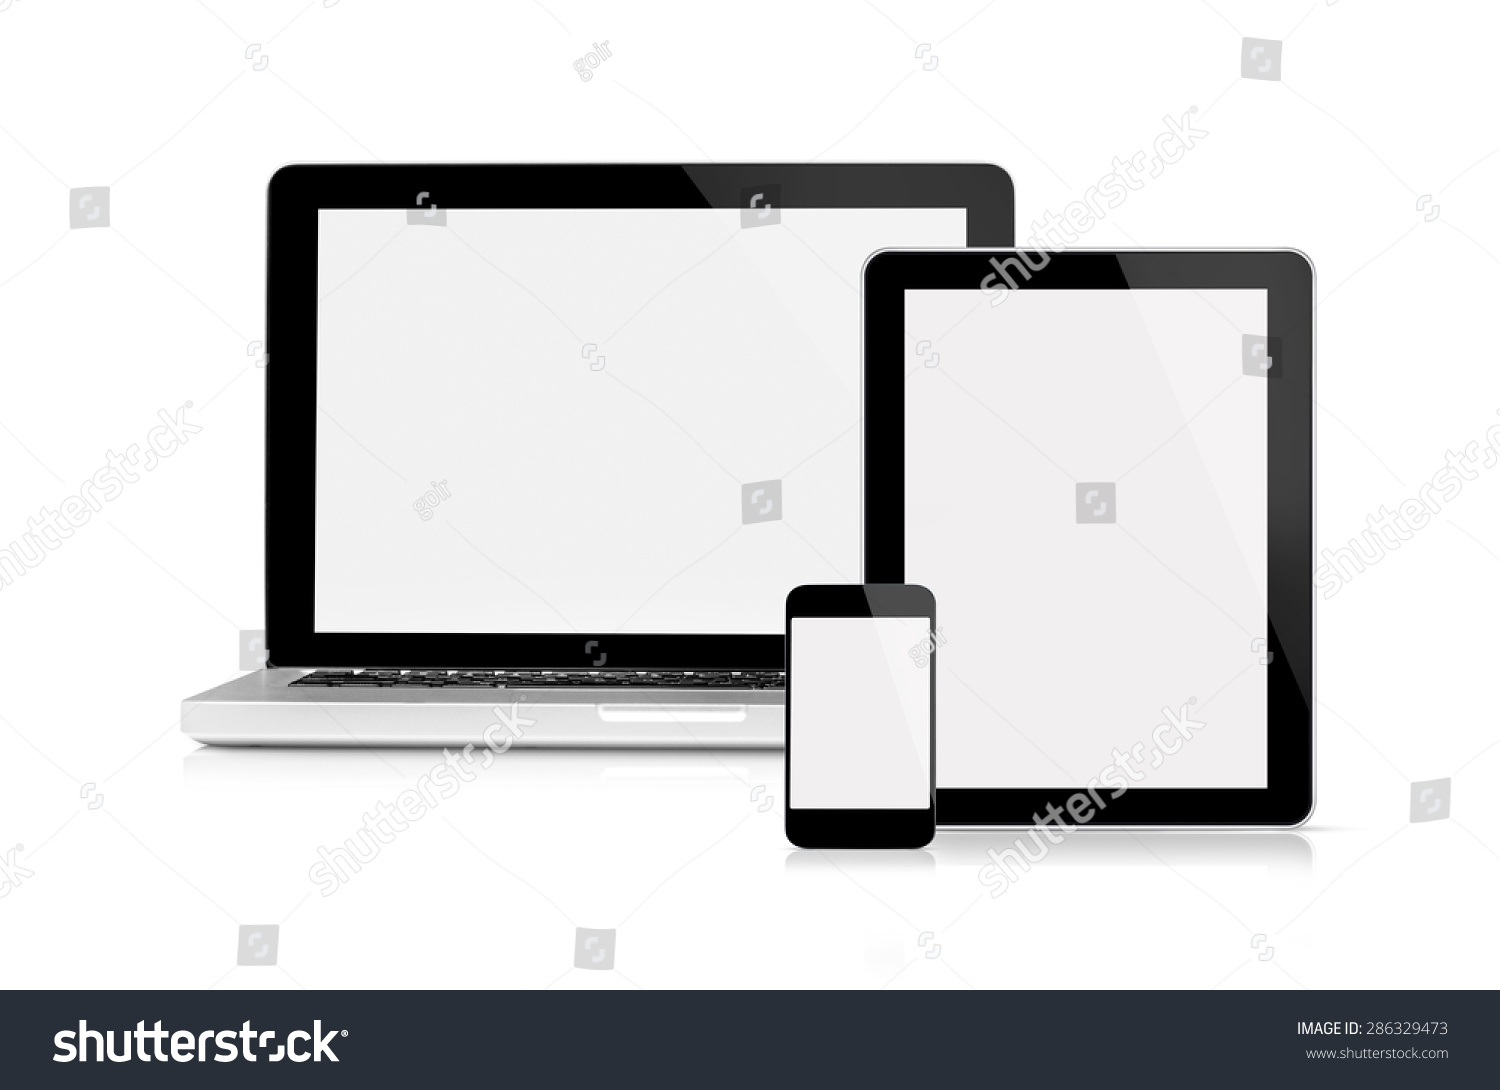 Laptop, tablet and mobile phone - This is a front view of Macbook Pro, iPhone and iPad Apple Inc with blank screen, isolated on white. #286329473